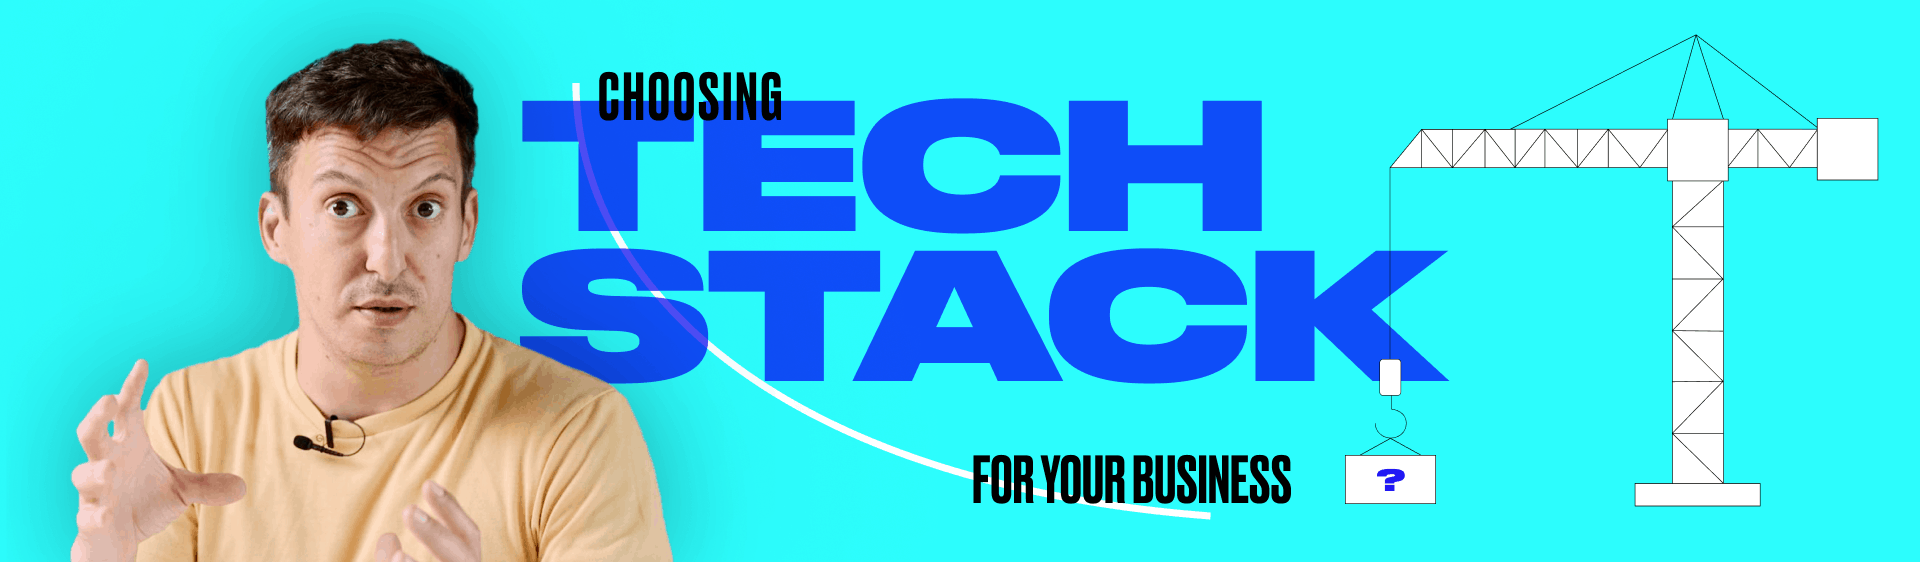 How to choose the right technology stack for your business